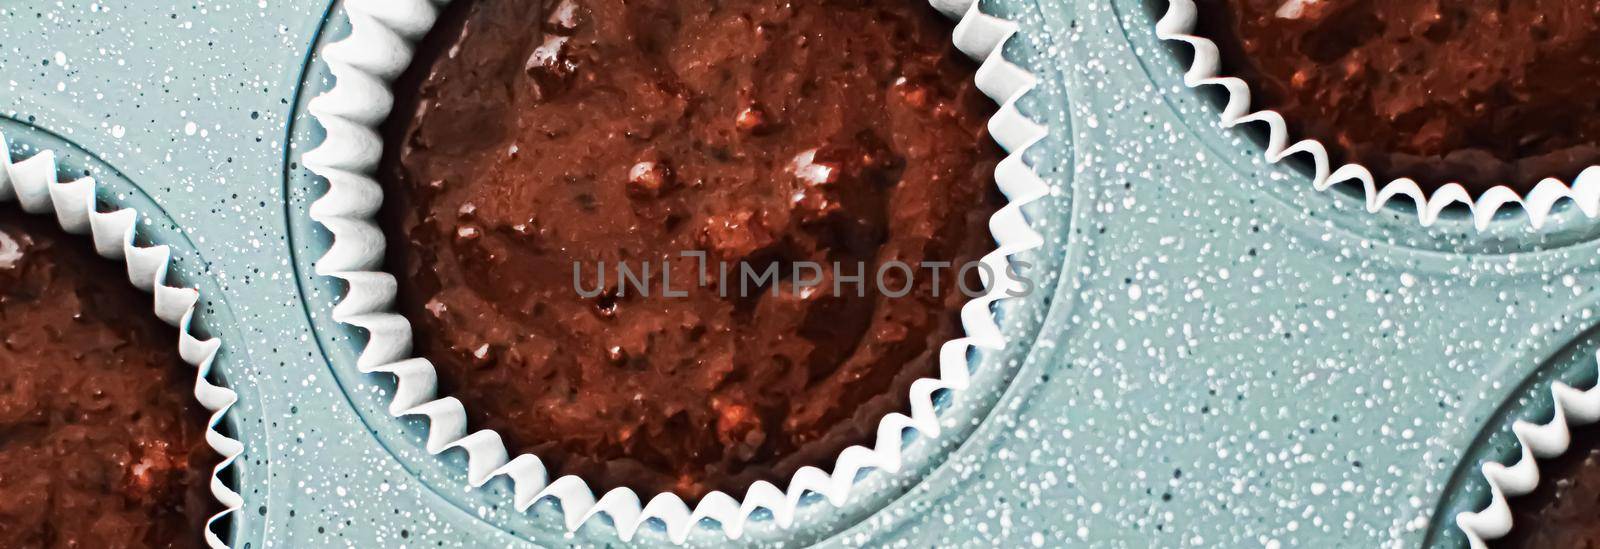 Chocolate muffin or cupcake batter in a pan ready to bake, homemade comfort food recipe by Anneleven